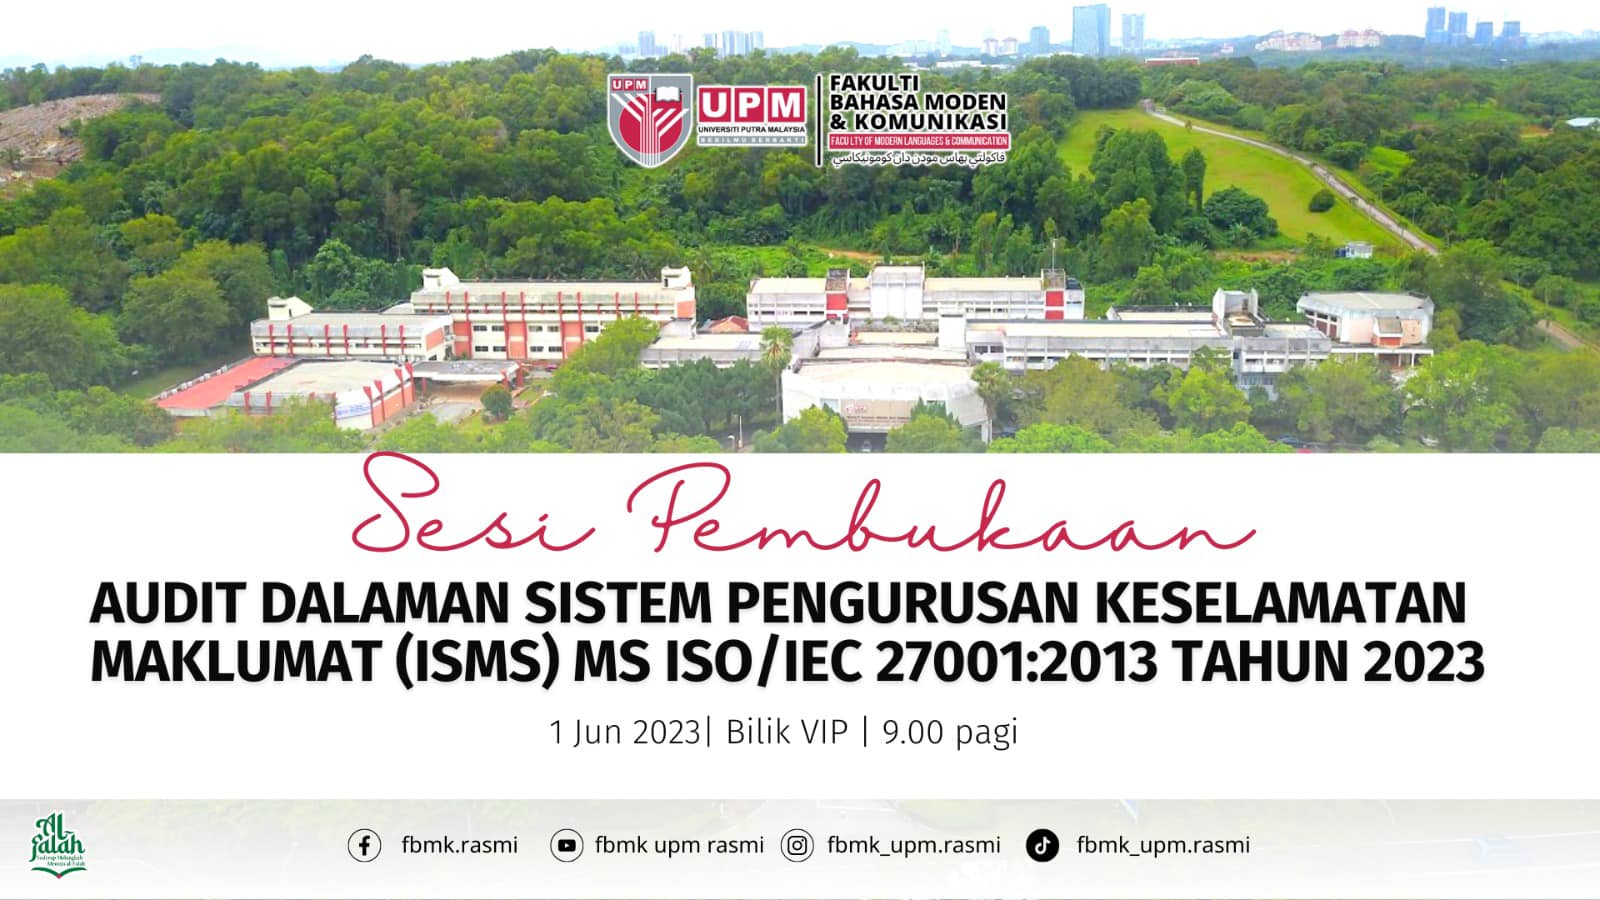 Internal Audit of the Information Security Management System (ISMS) MS ISO/IEC 27001:2013 Year 2023 Conducted at the Faculty of Modern Languages & Communication